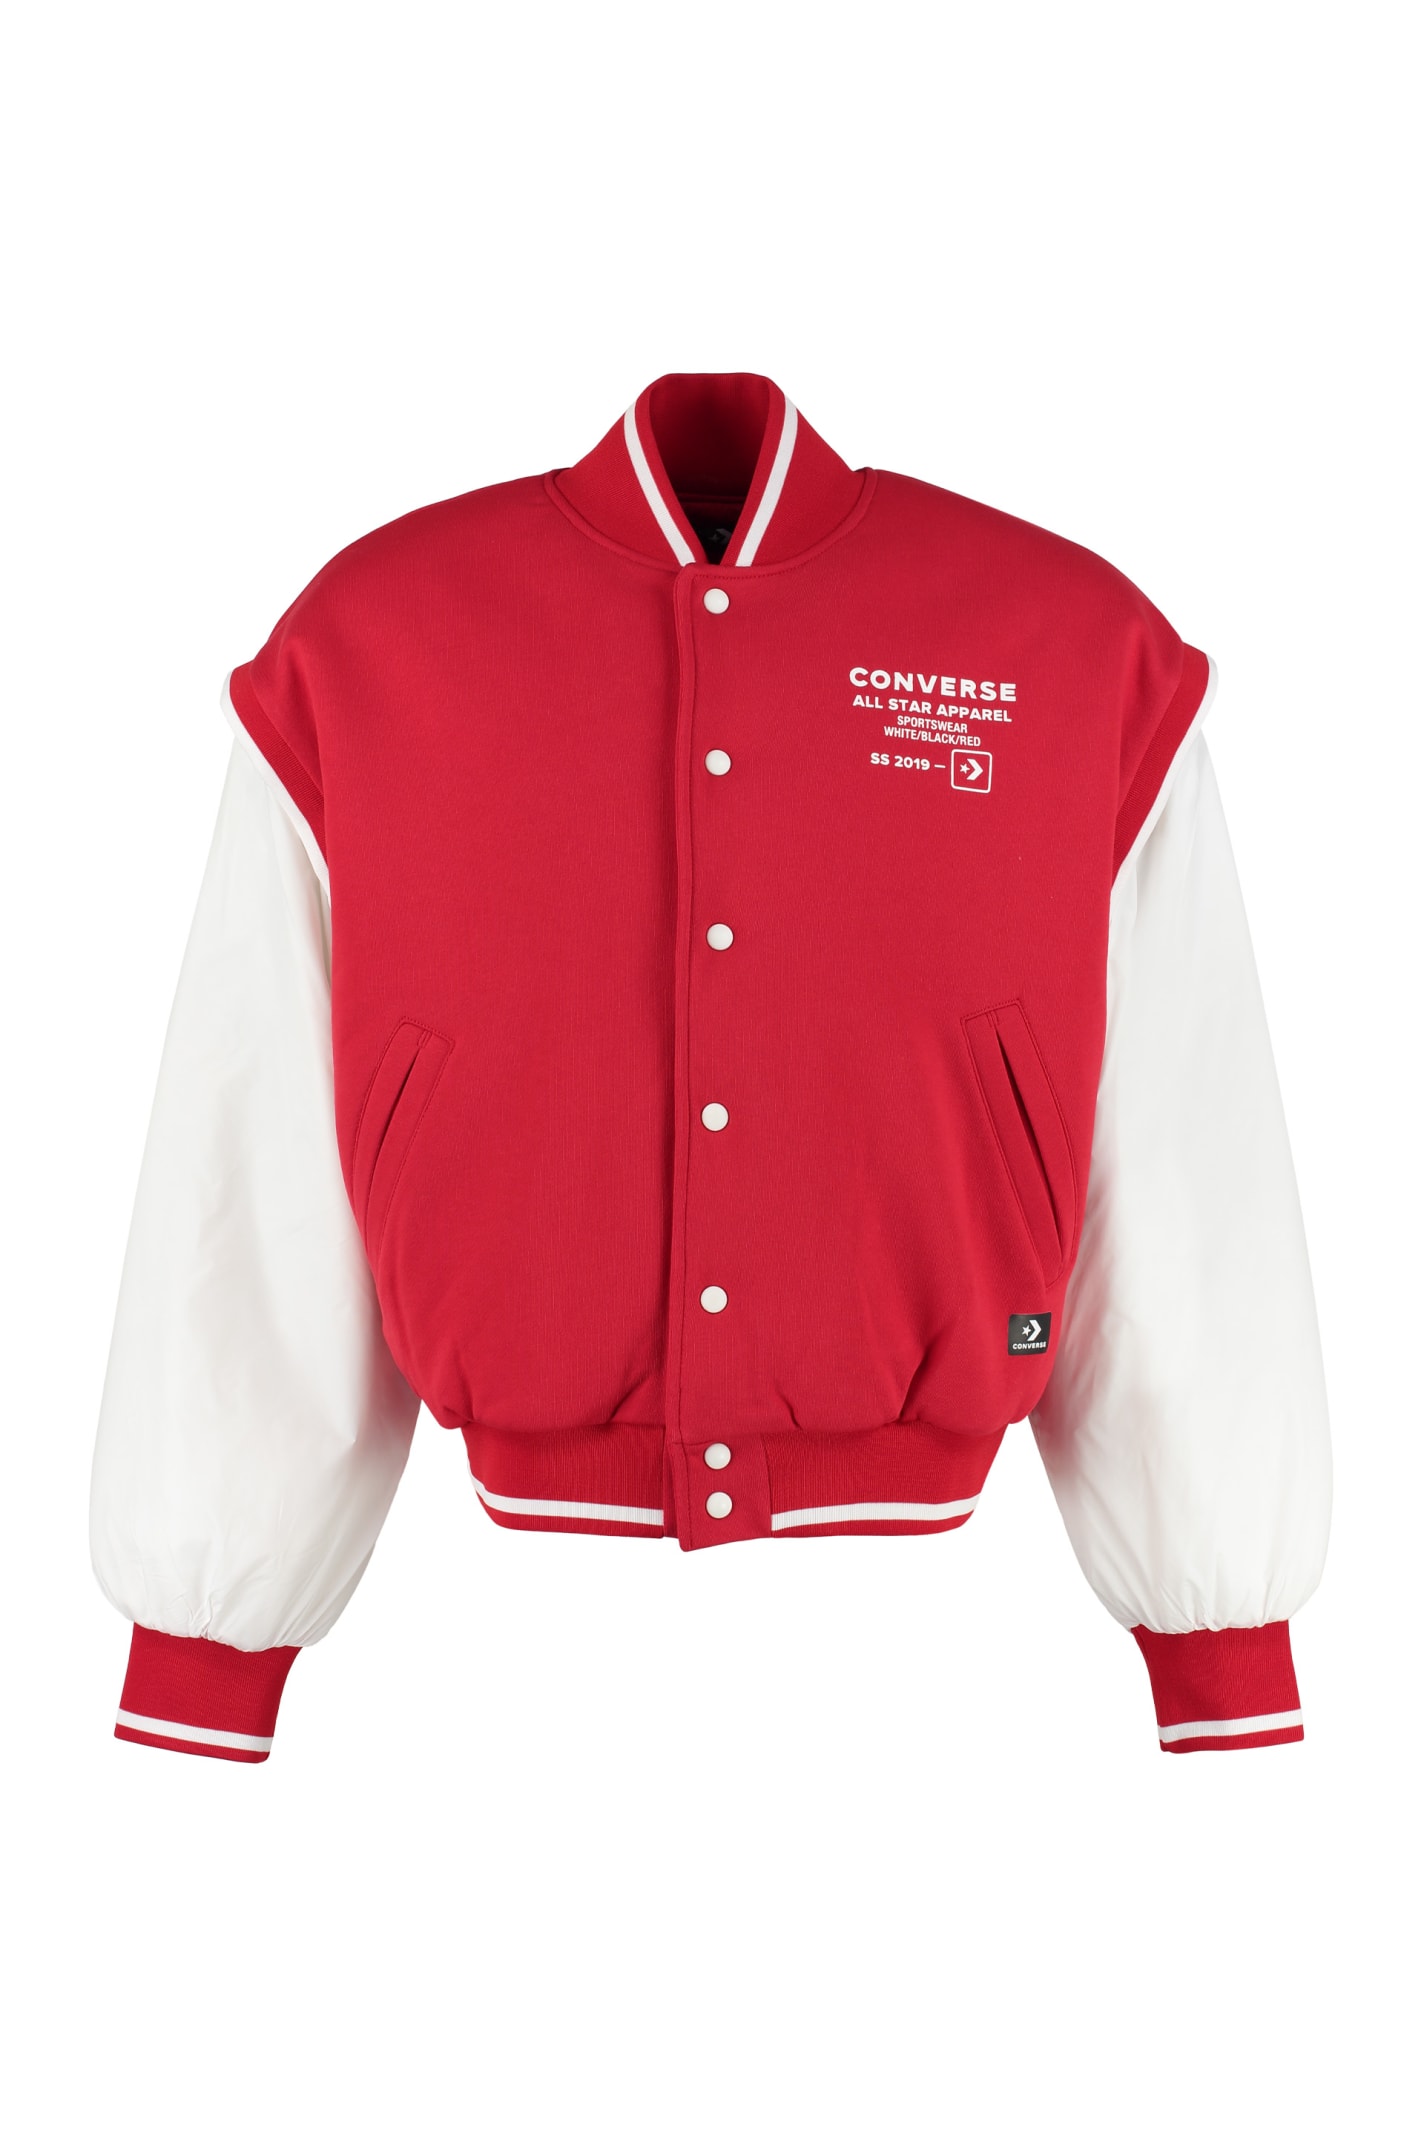 converse jacket red